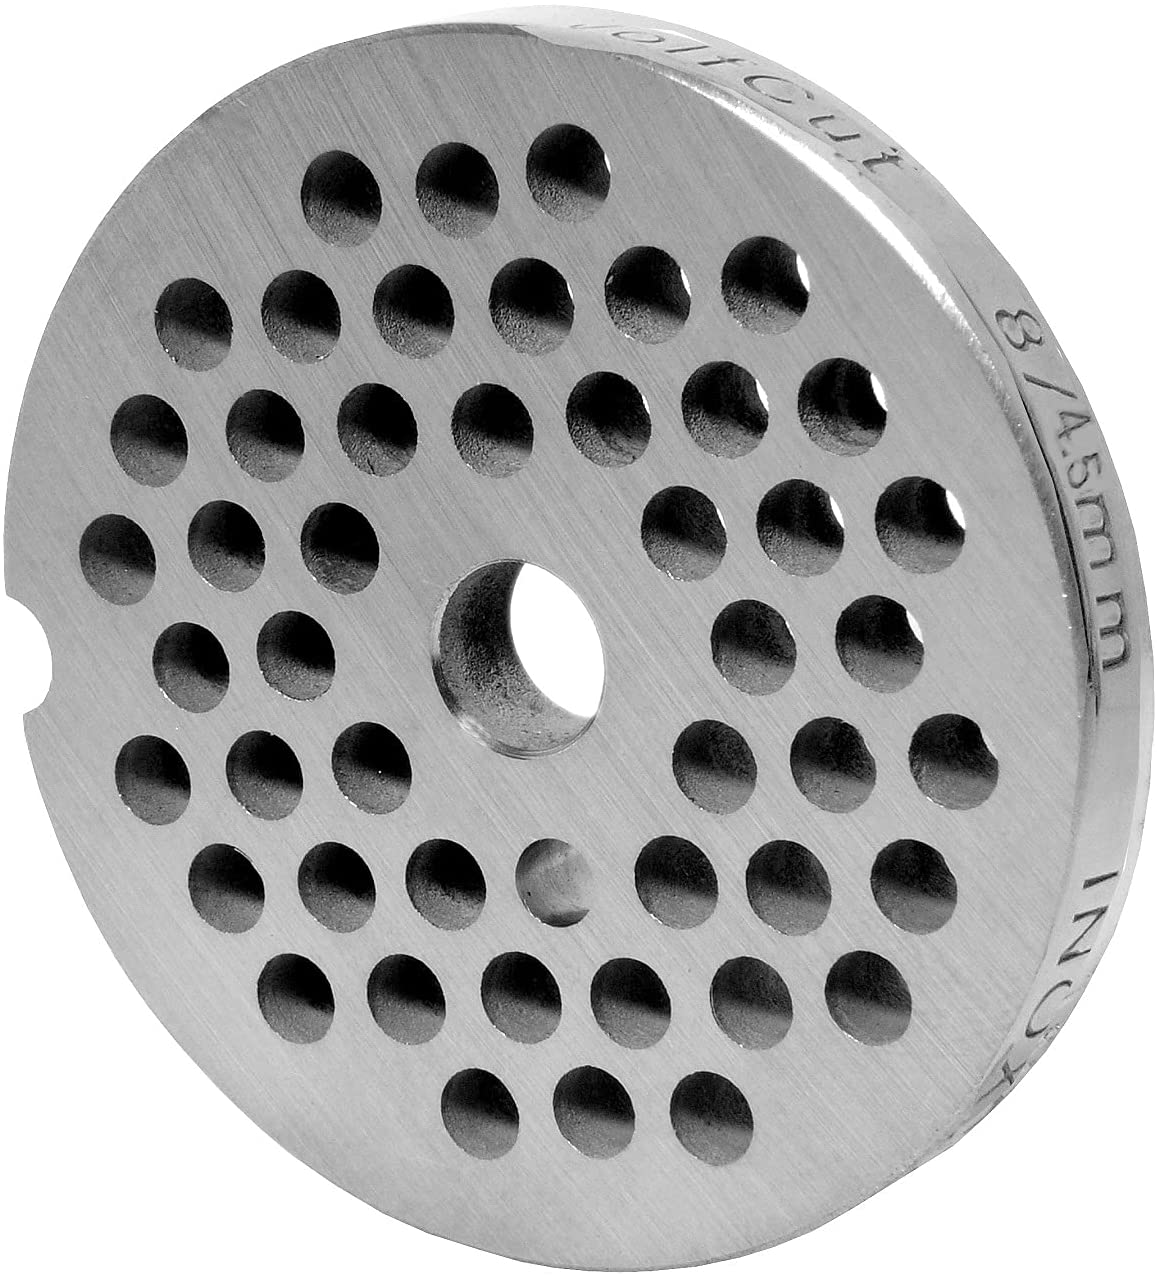 WolfCut Perforated disc size 8 with 4.5 mm bore